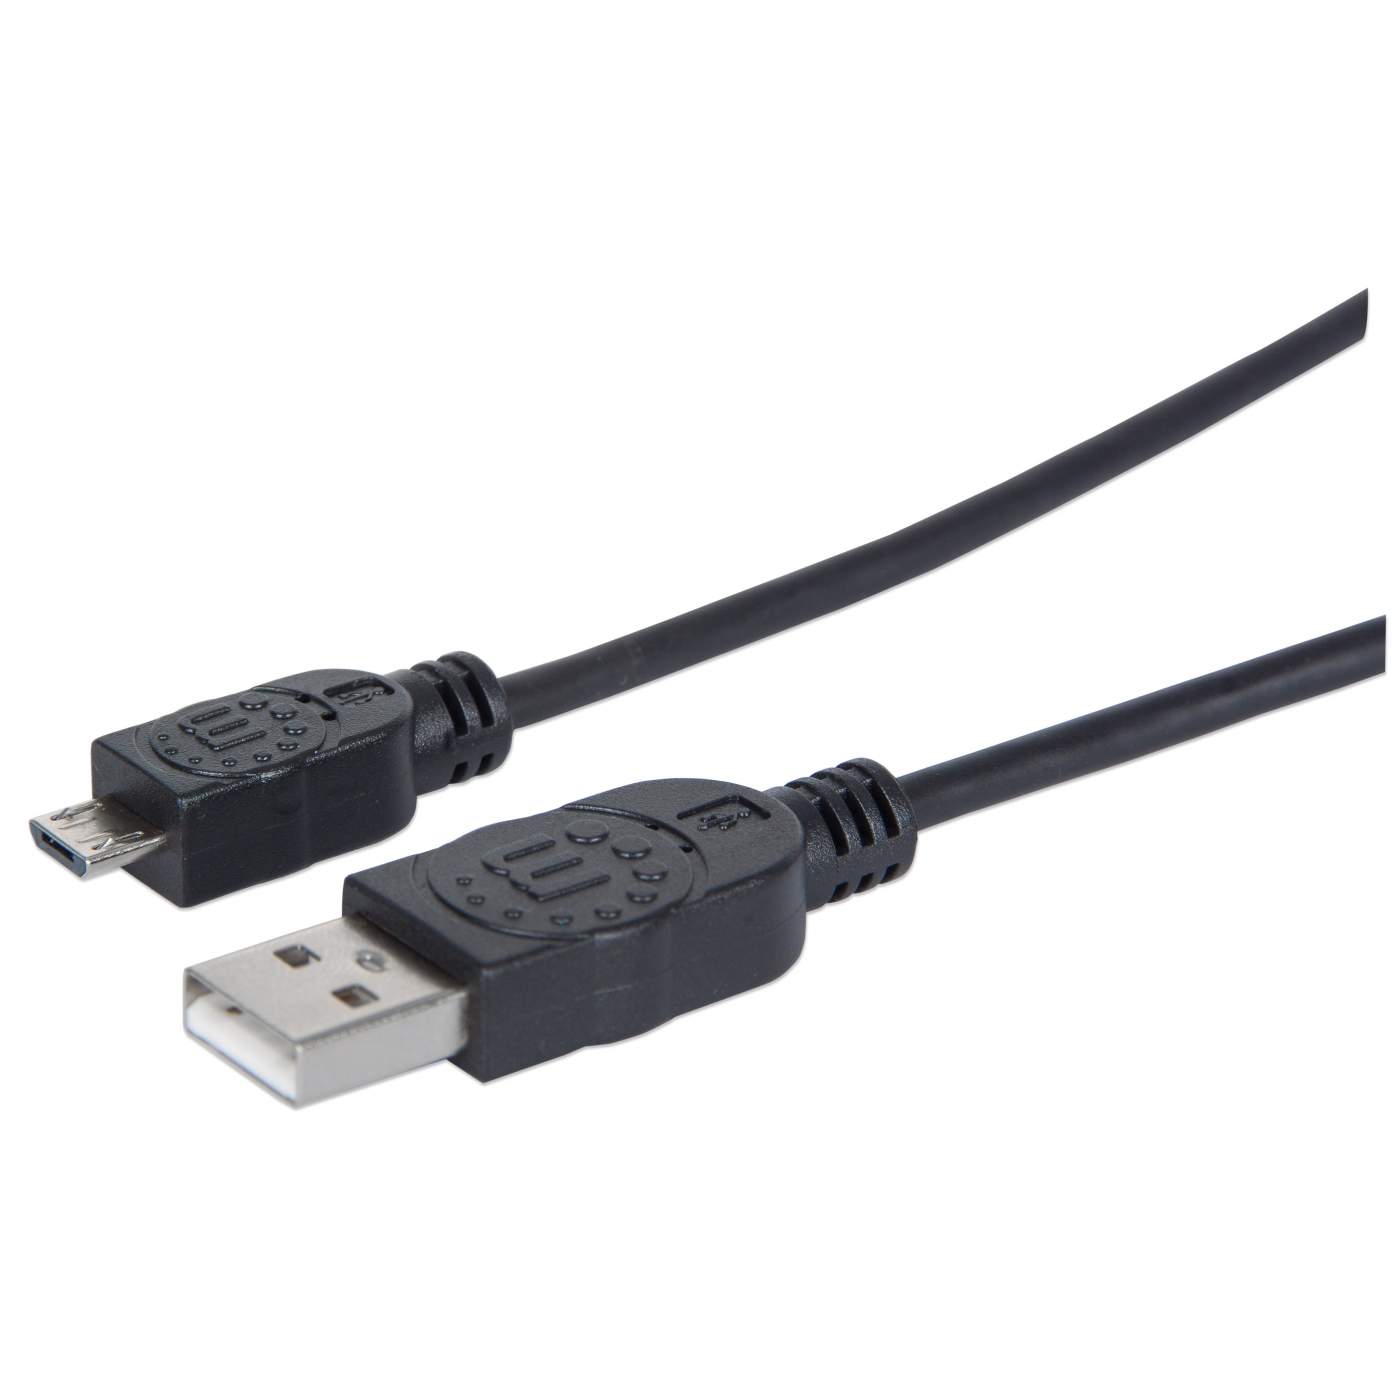 Hi-Speed USB Micro-B Device Cable Image 1